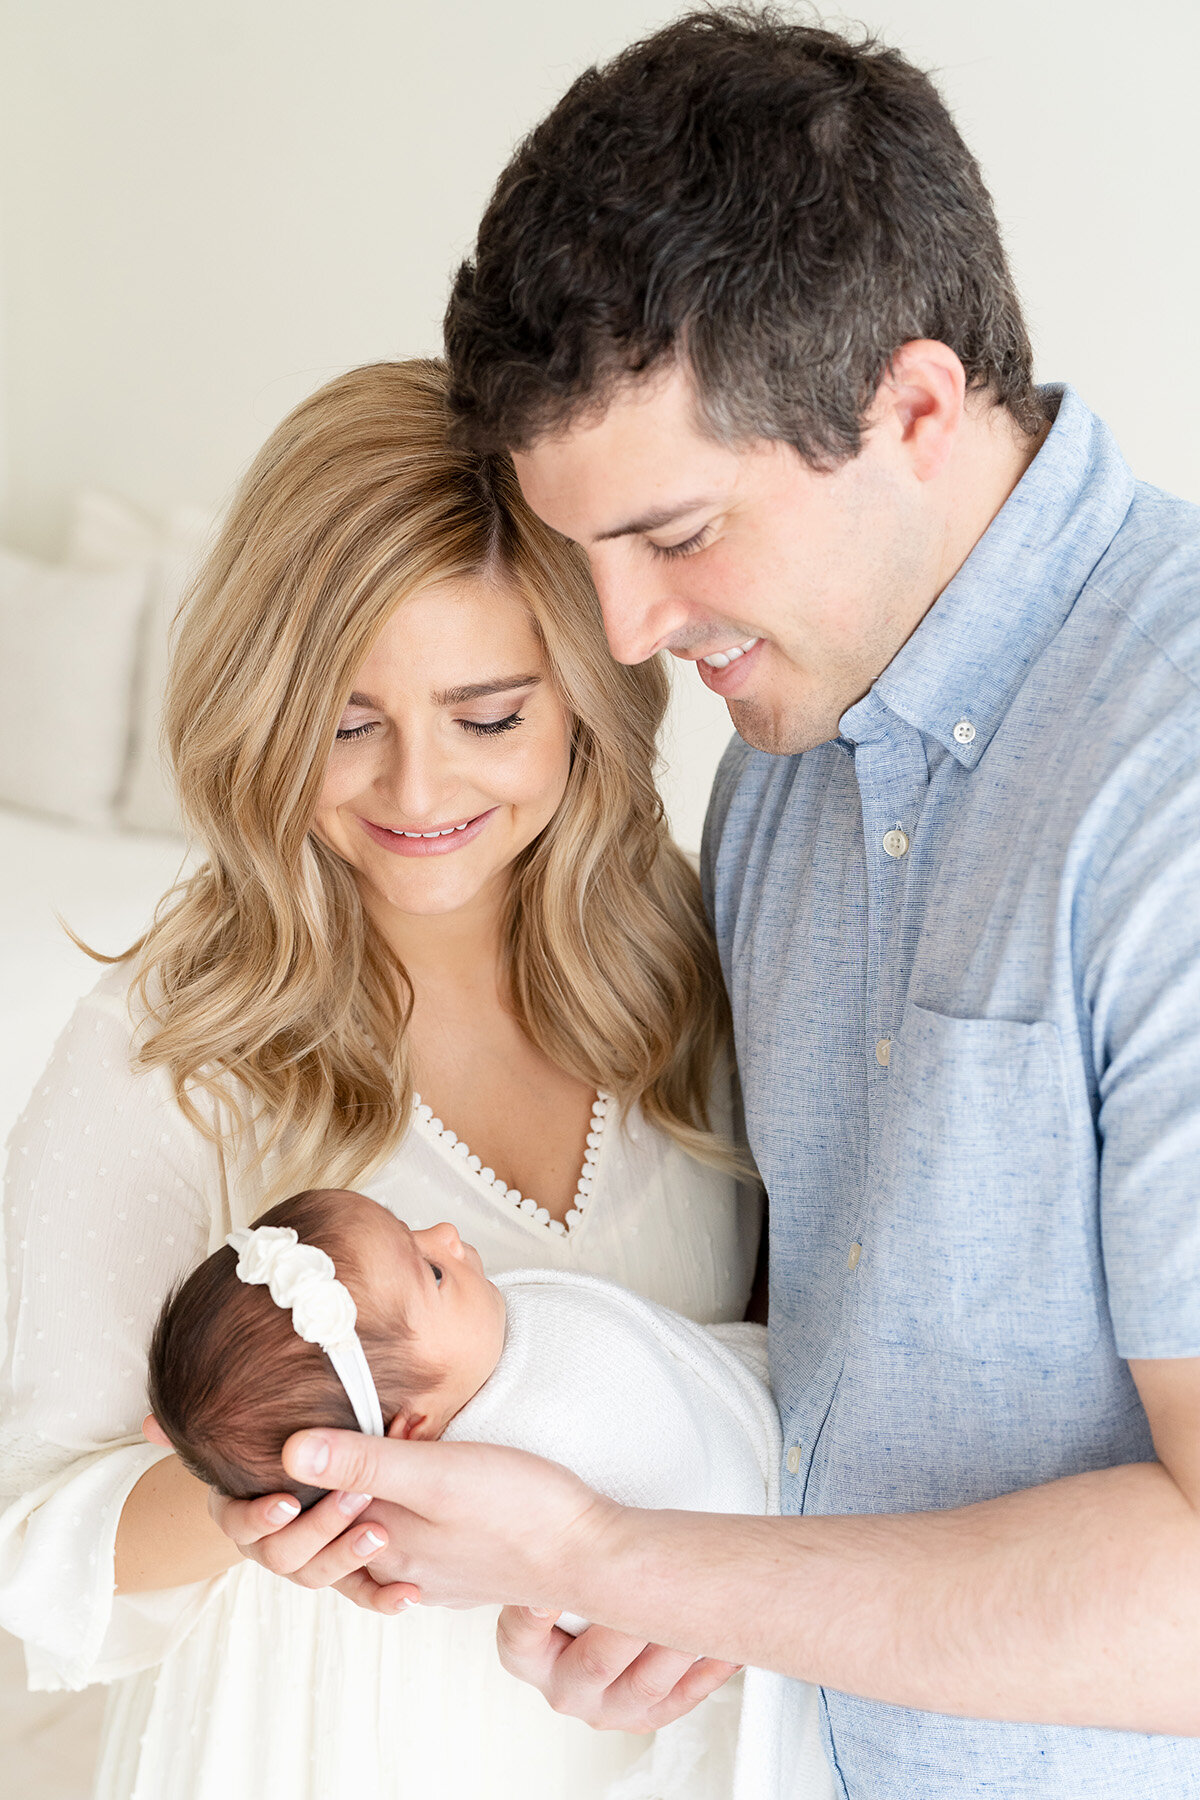 light and airy newborn photo session with mom and dad holding baby girl. baby is looking up at parents.